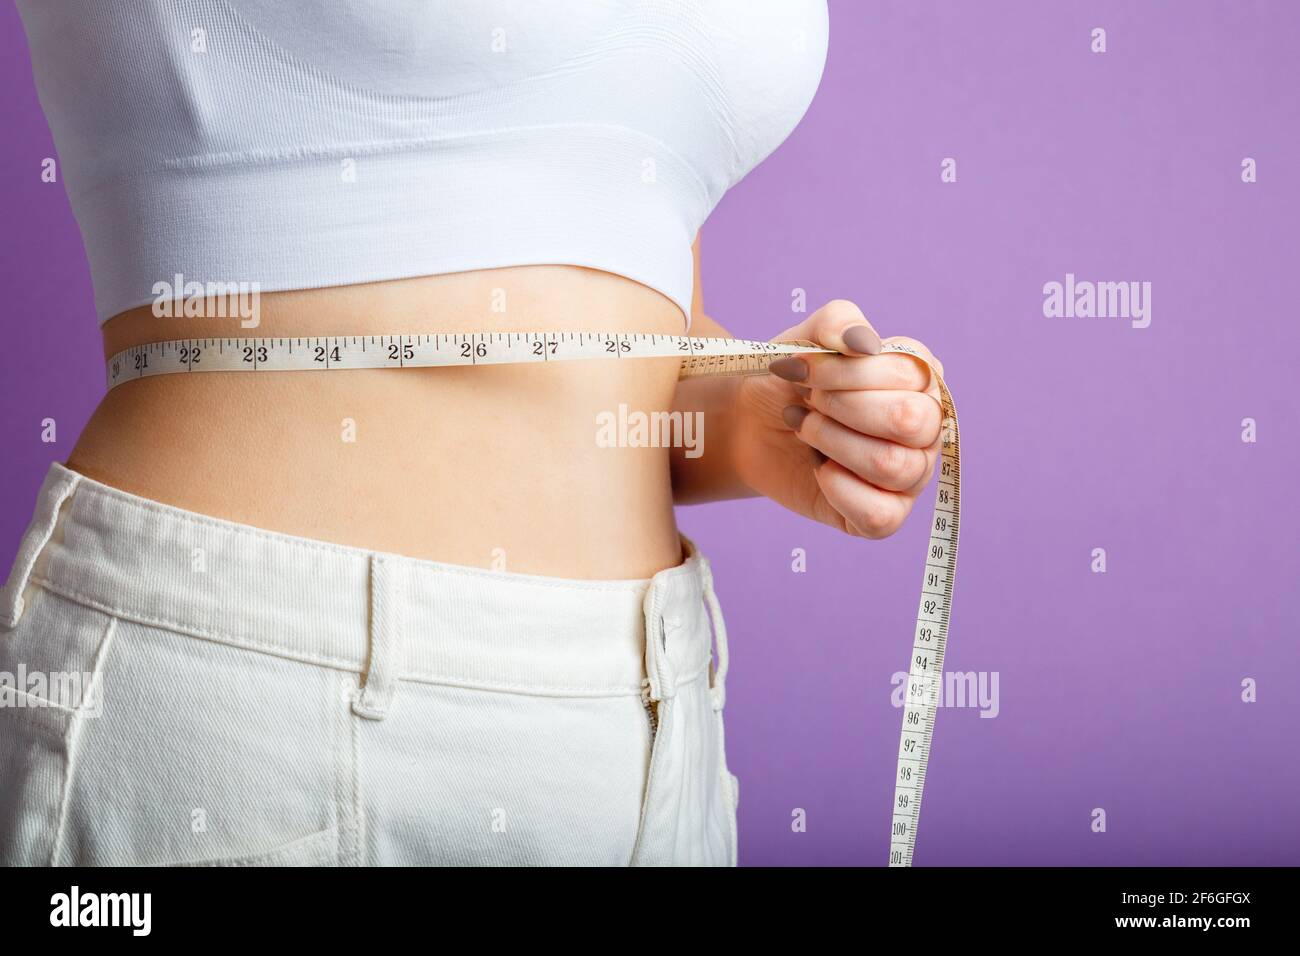 https://c8.alamy.com/comp/2F6GFGX/slim-woman-measures-her-waist-waistline-with-measuring-tape-healthy-body-shaping-weight-loss-concept-slim-waist-small-belly-in-big-white-pants-isola-2F6GFGX.jpg